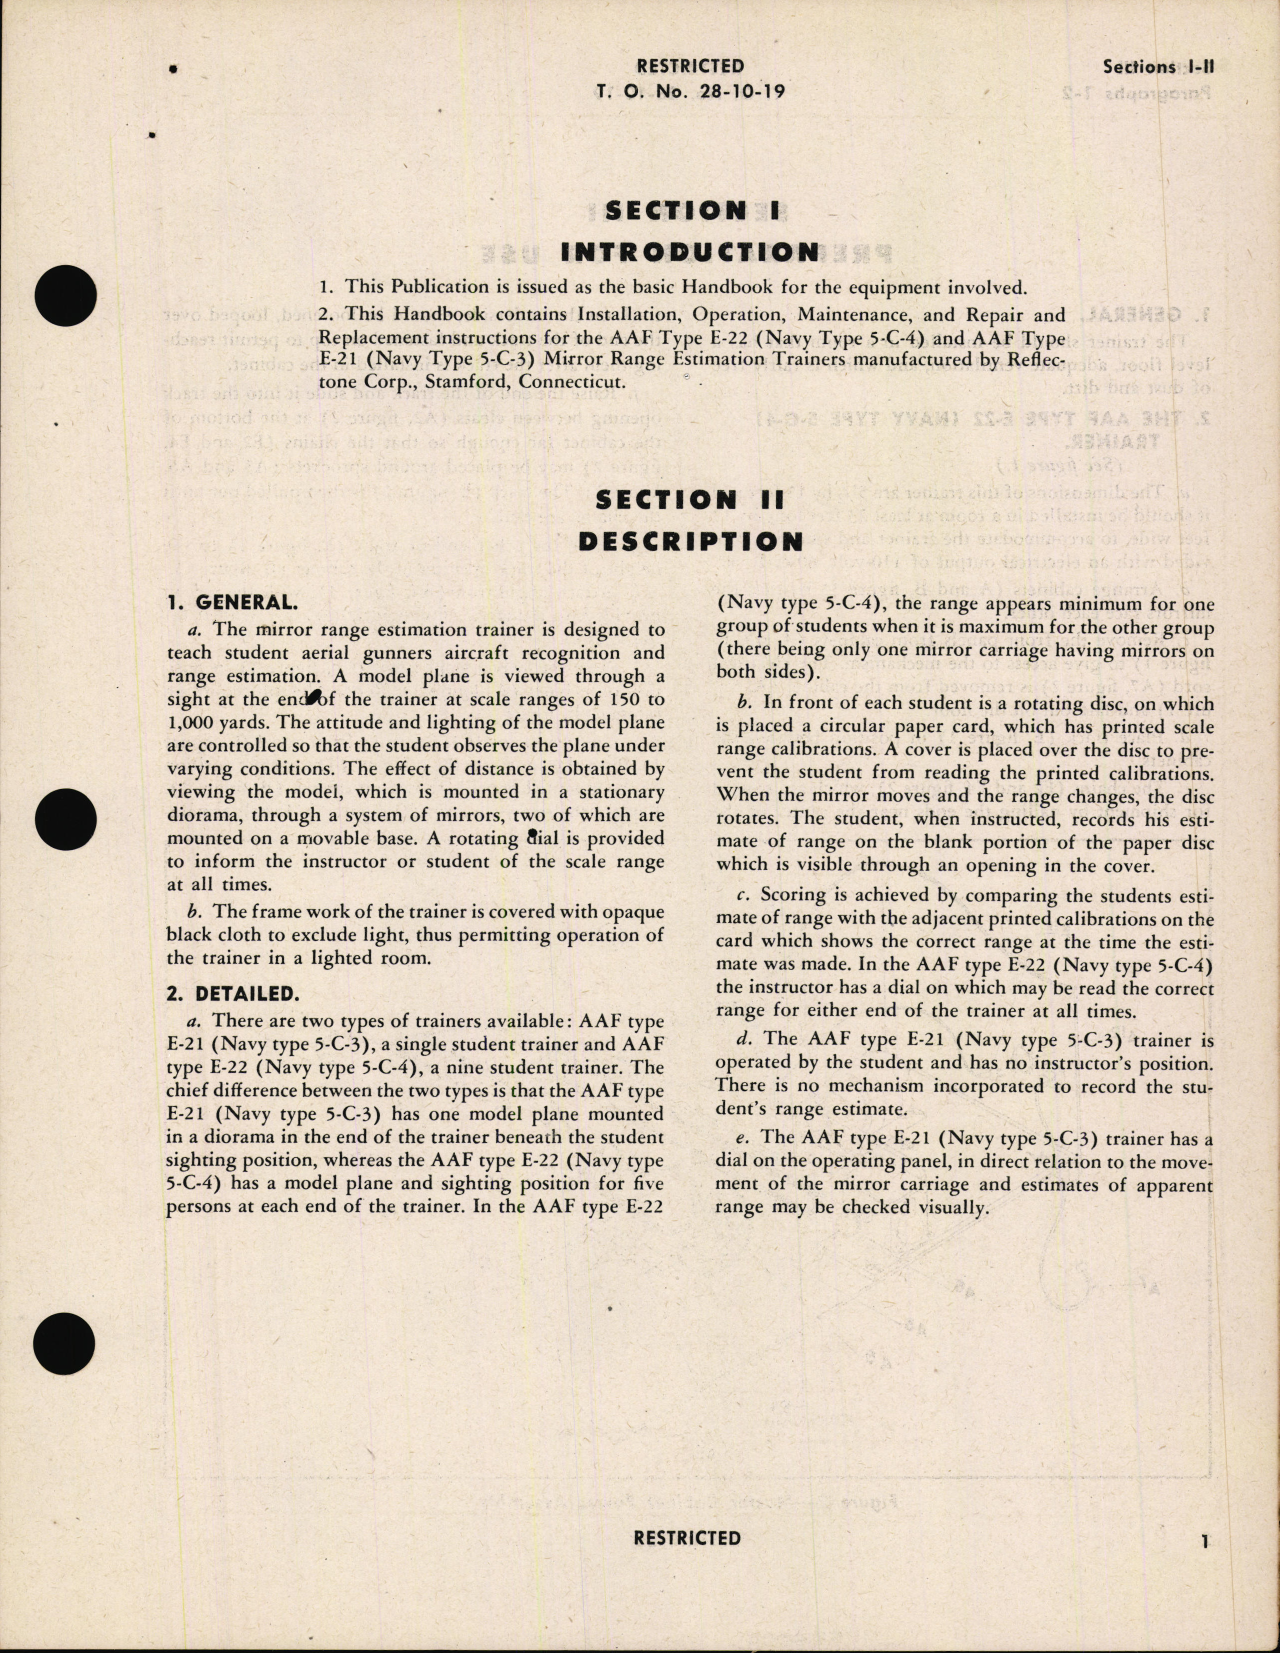 Sample page 5 from AirCorps Library document: Handbook of Instructions with Parts Catalog for Mirror Range Estimation Trainers